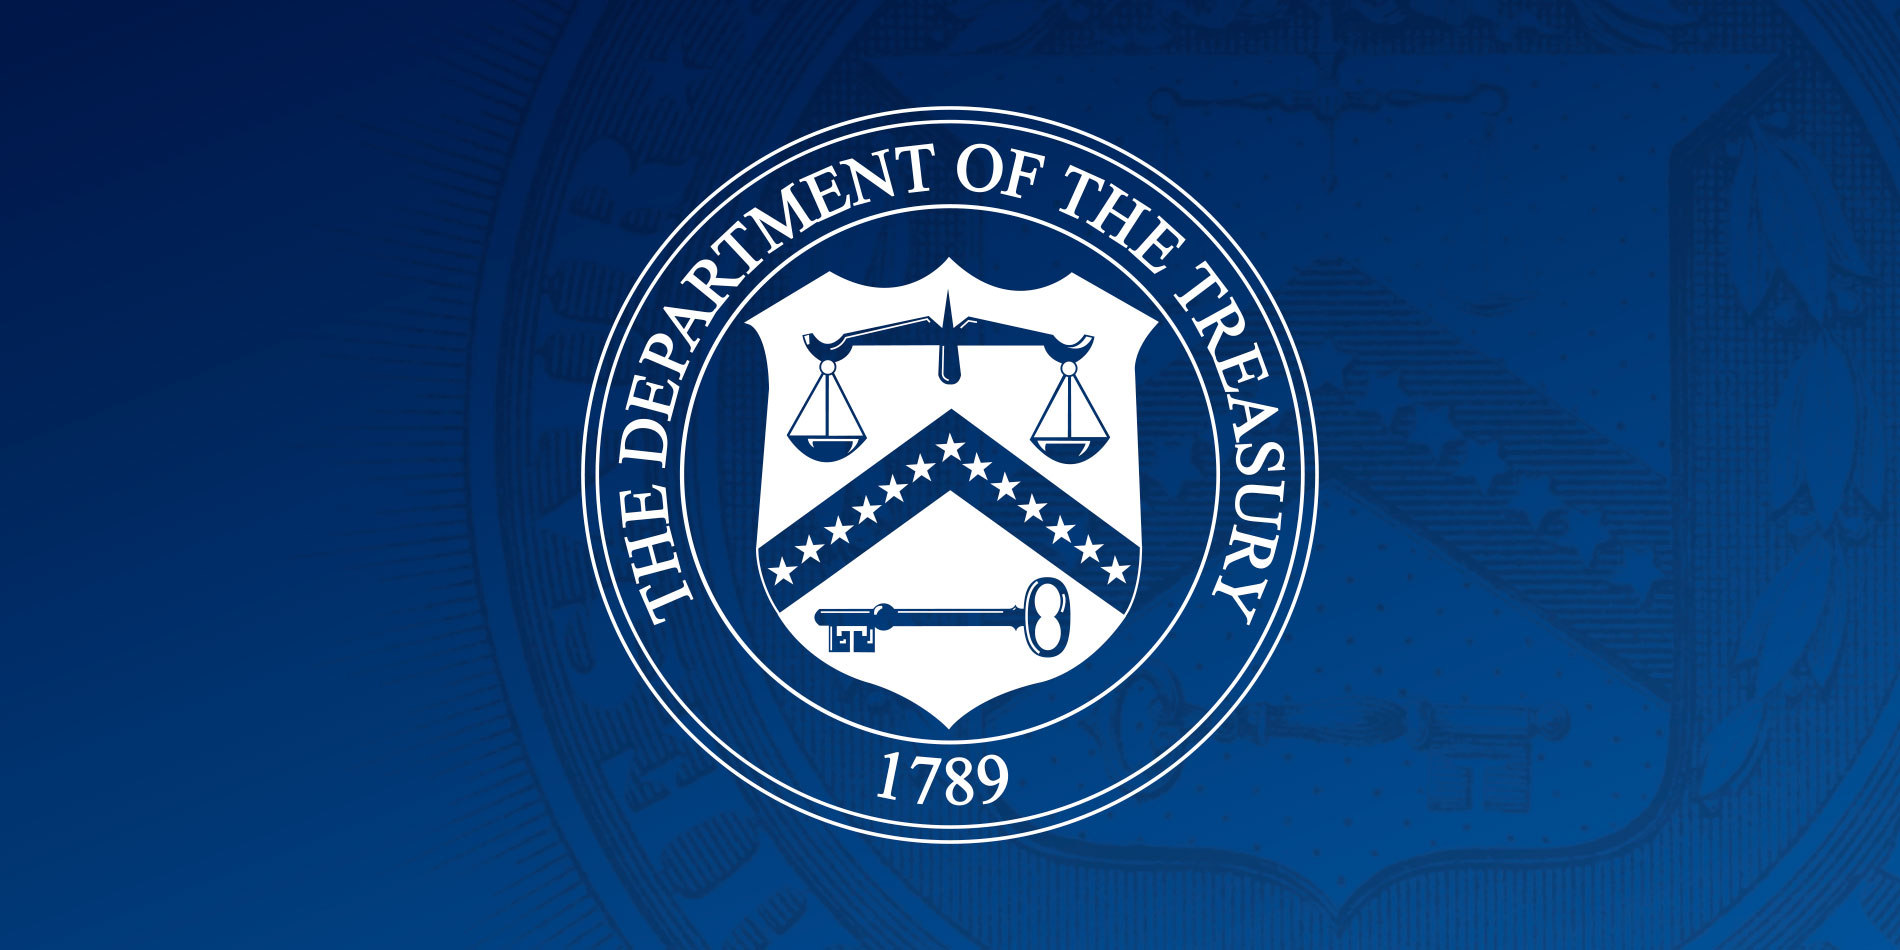 Treasury Releases Report on Macroeconomic and Foreign Exchange Policies of Major Trading Partners of the United States